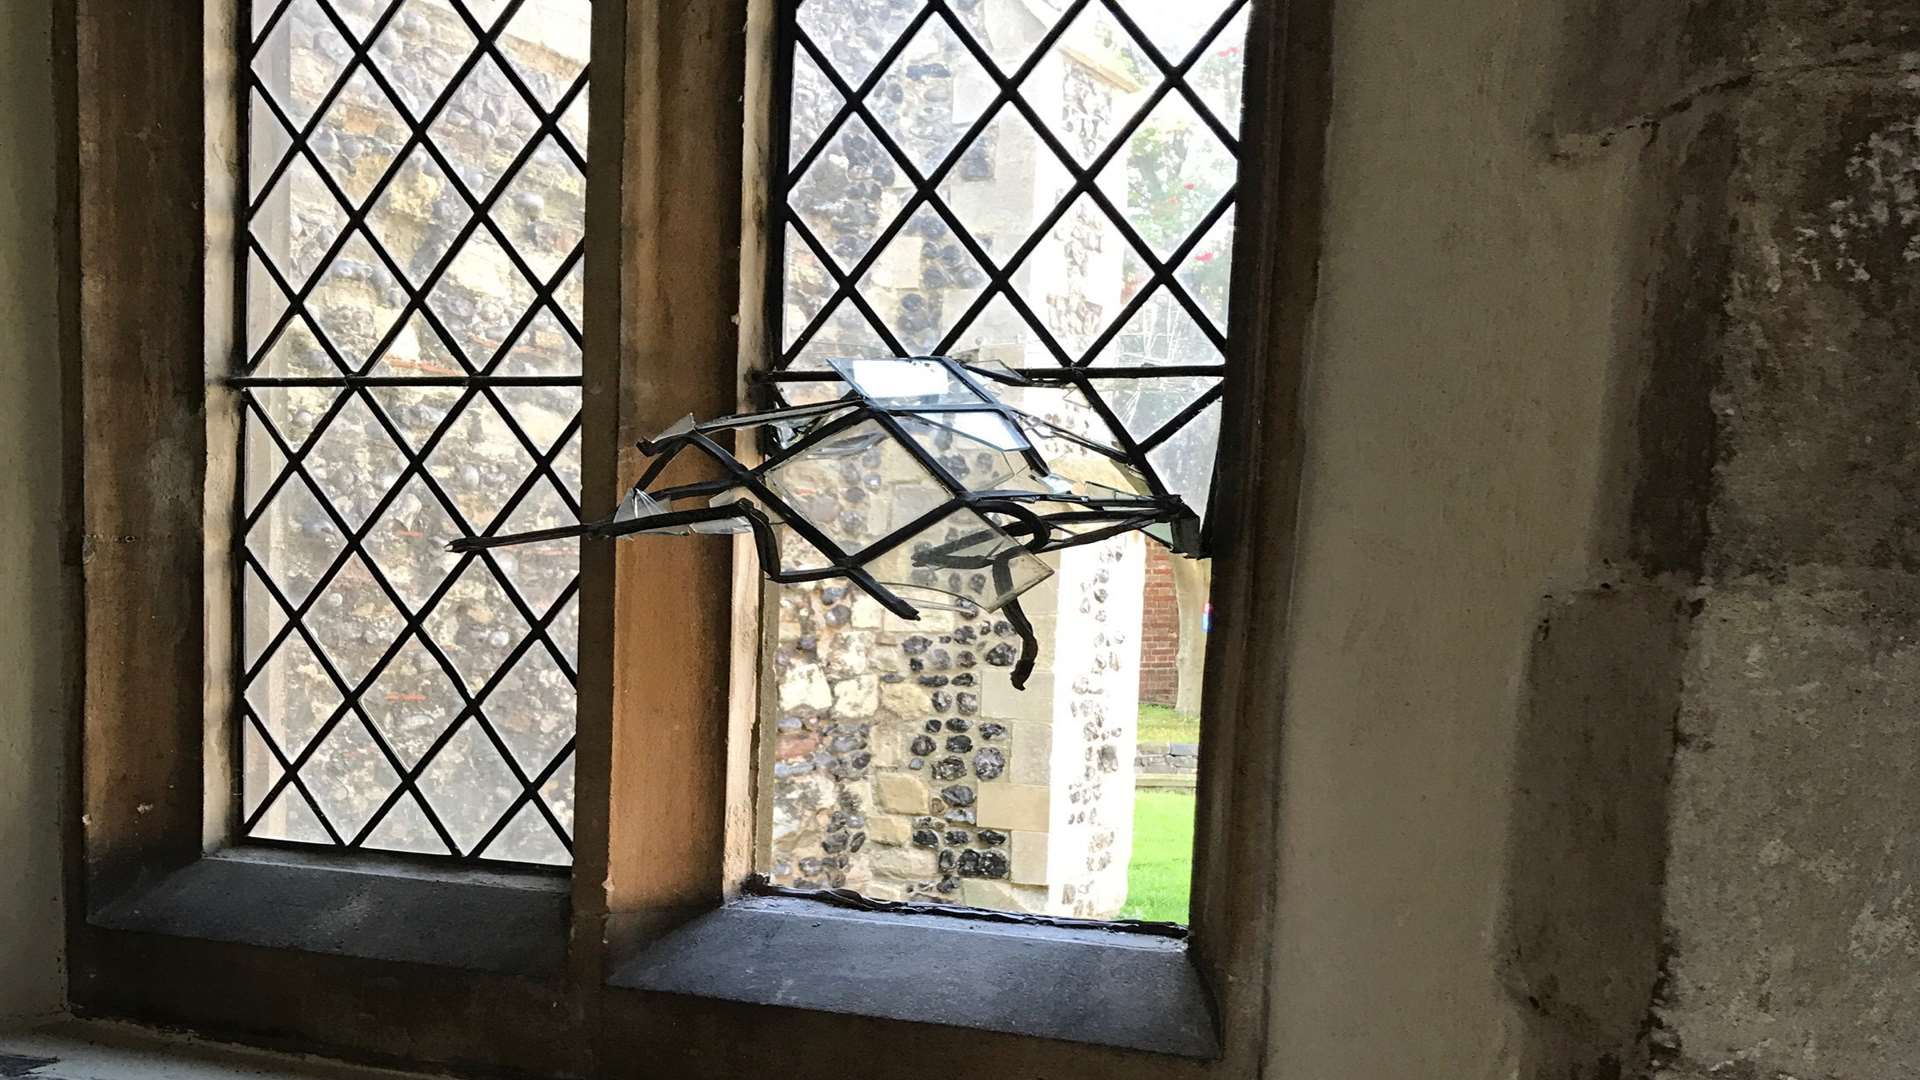 The burglars gained access to St Peter's Church via a window